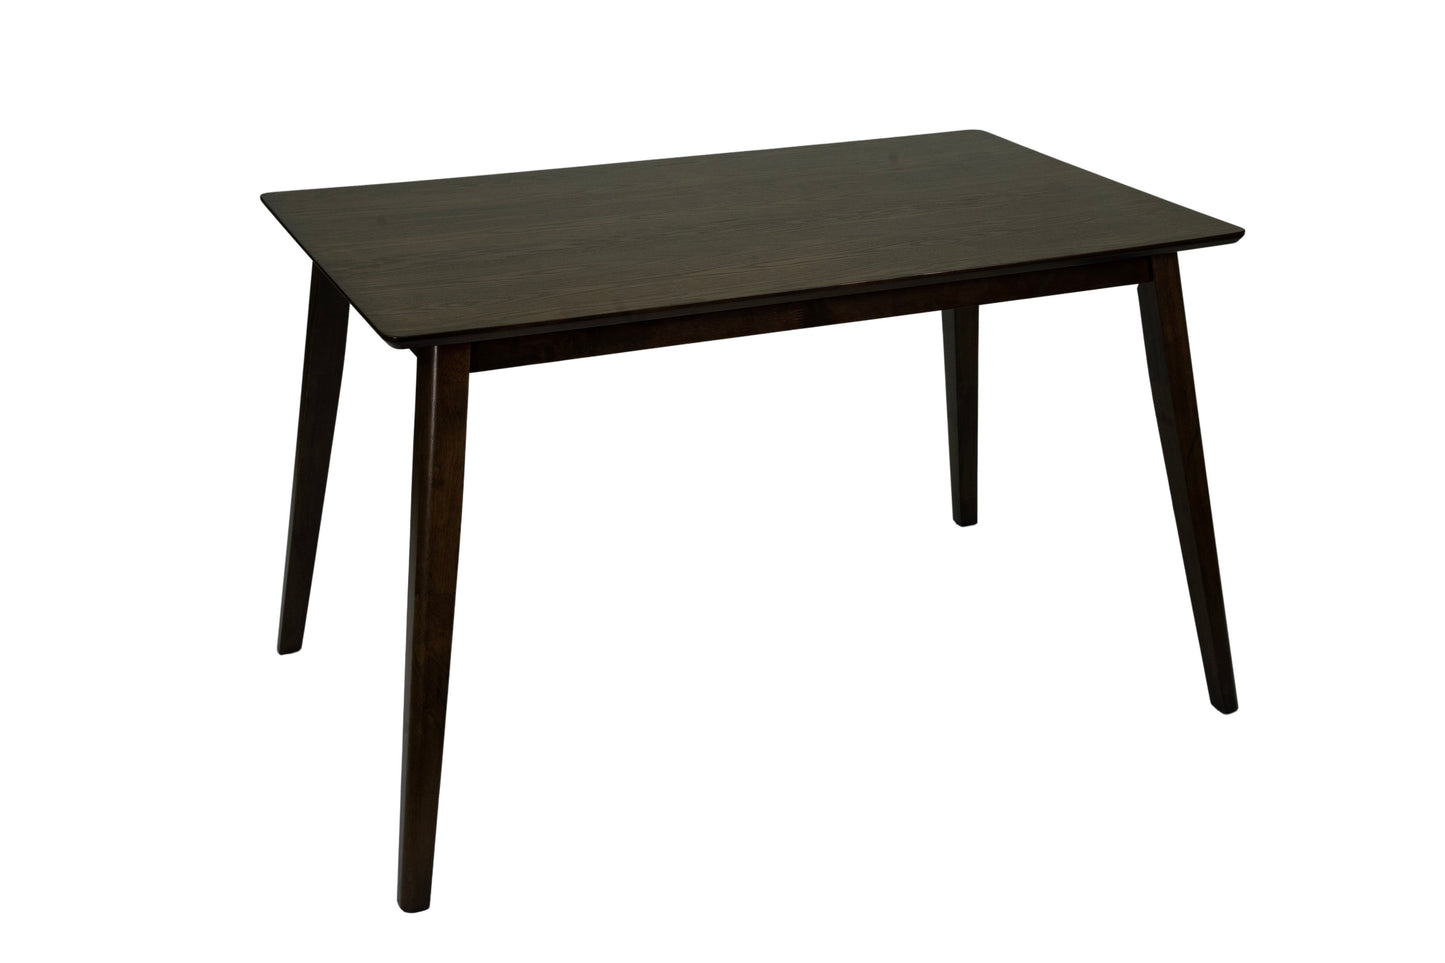 47" Promo Dining Table